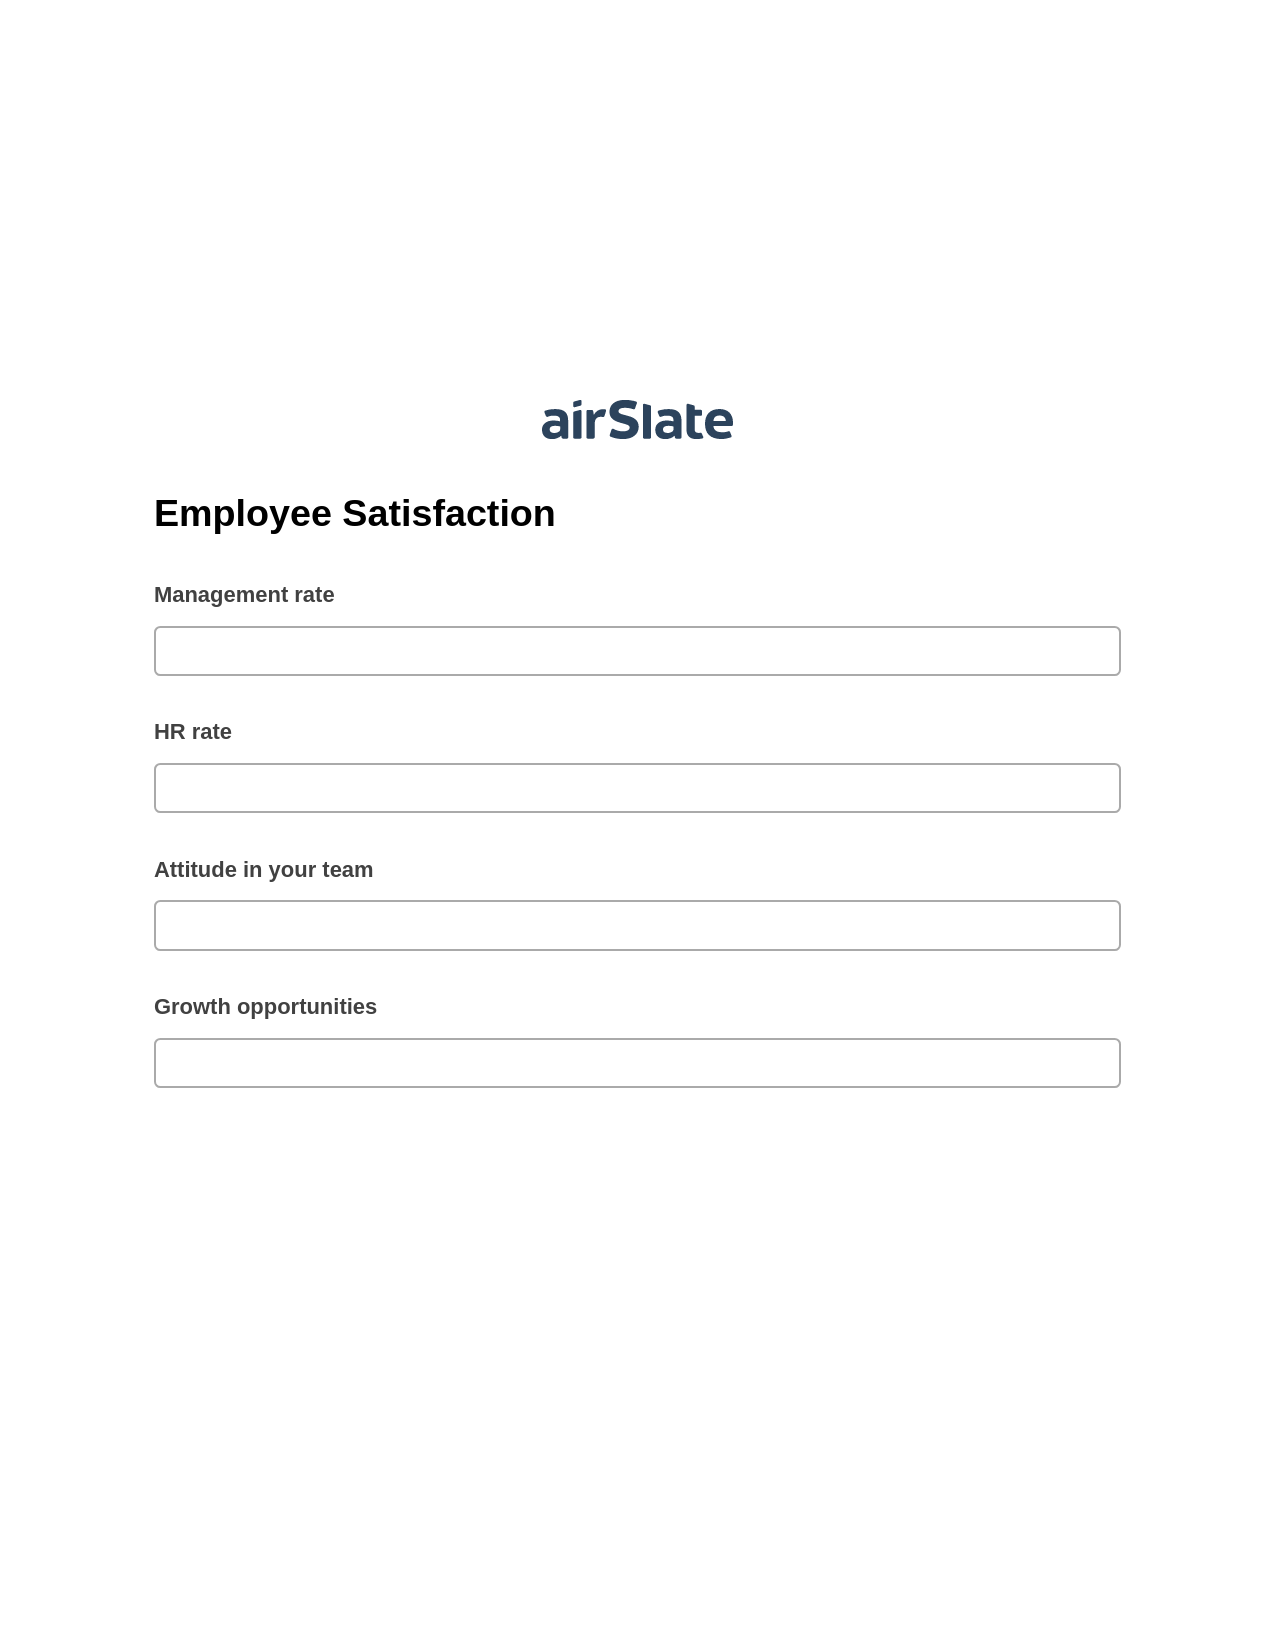 Employee Satisfaction Pre-fill from CSV File Bot, Roles Reminder Bot, Export to NetSuite Record Bot